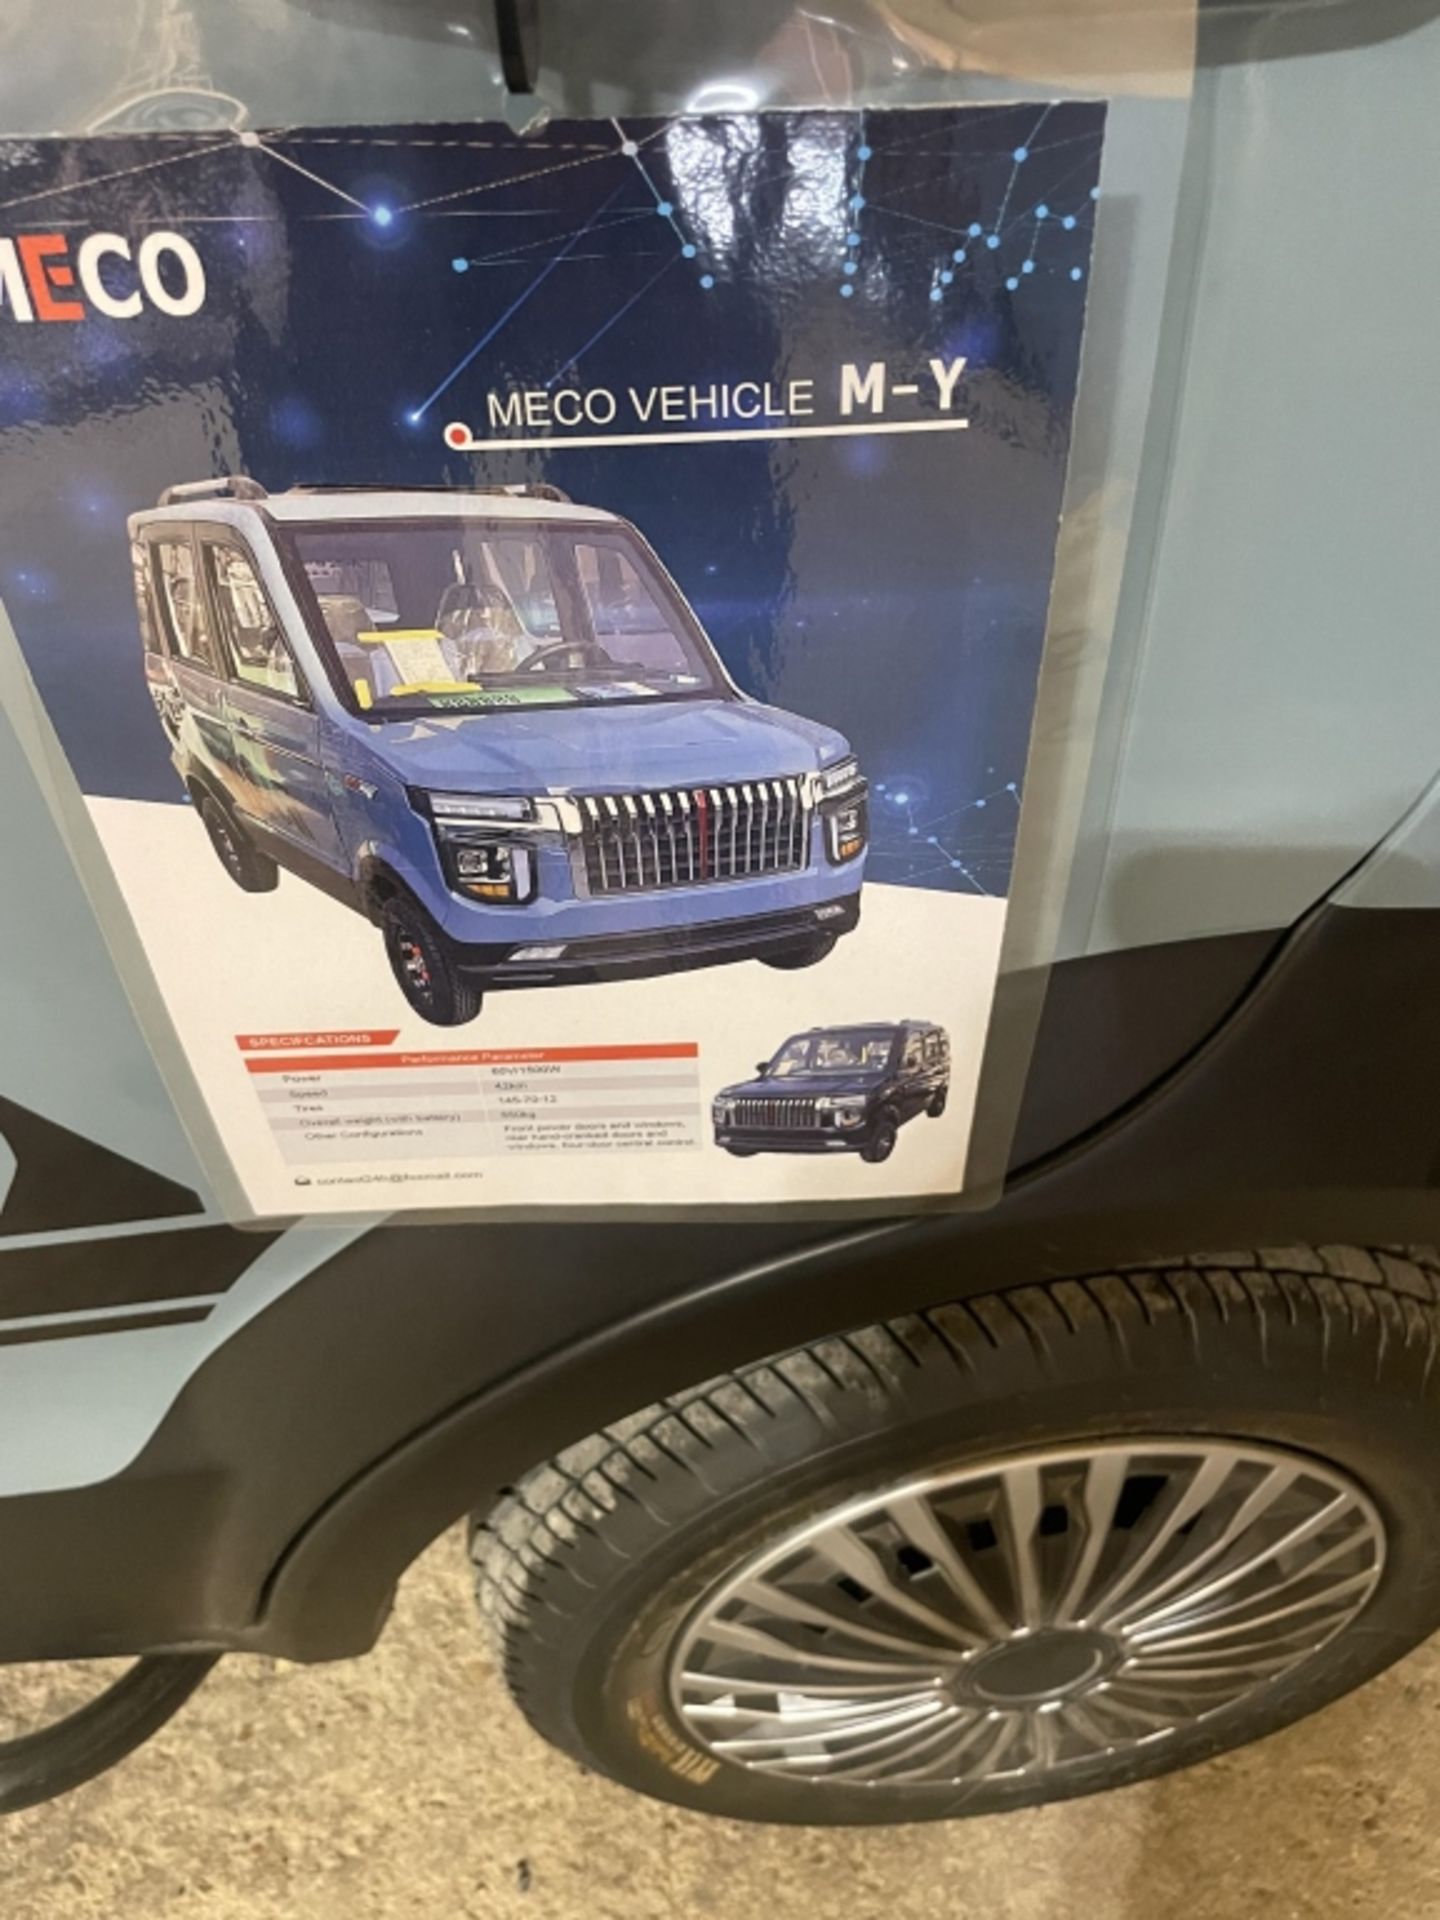 MECO M-Y Electric Vehicle - Image 15 of 15